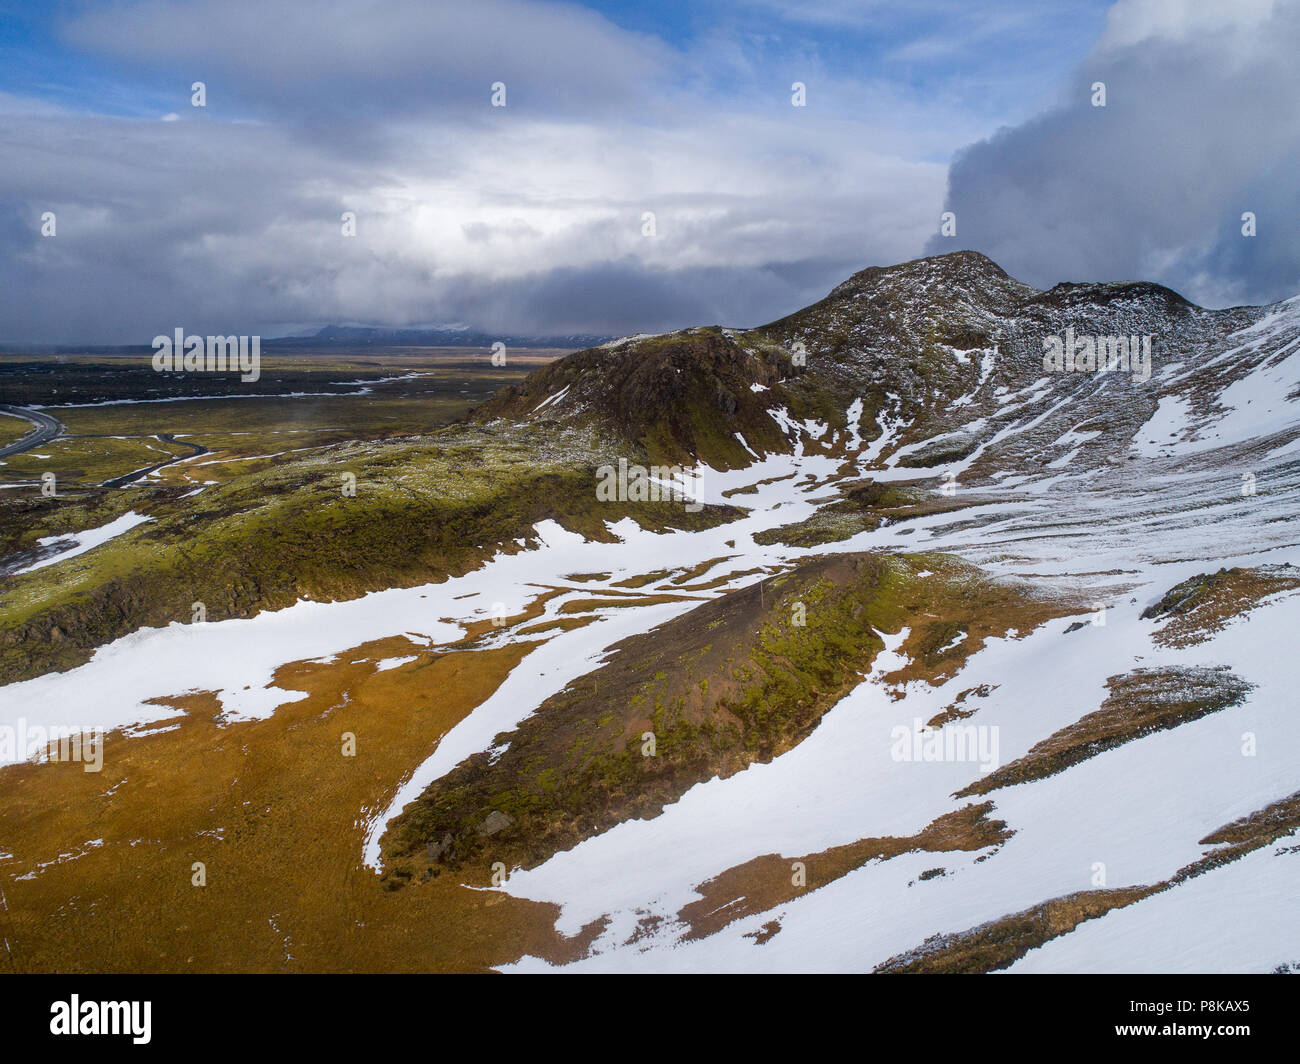 Aerial view of Iceland landscape with snow Stock Photo